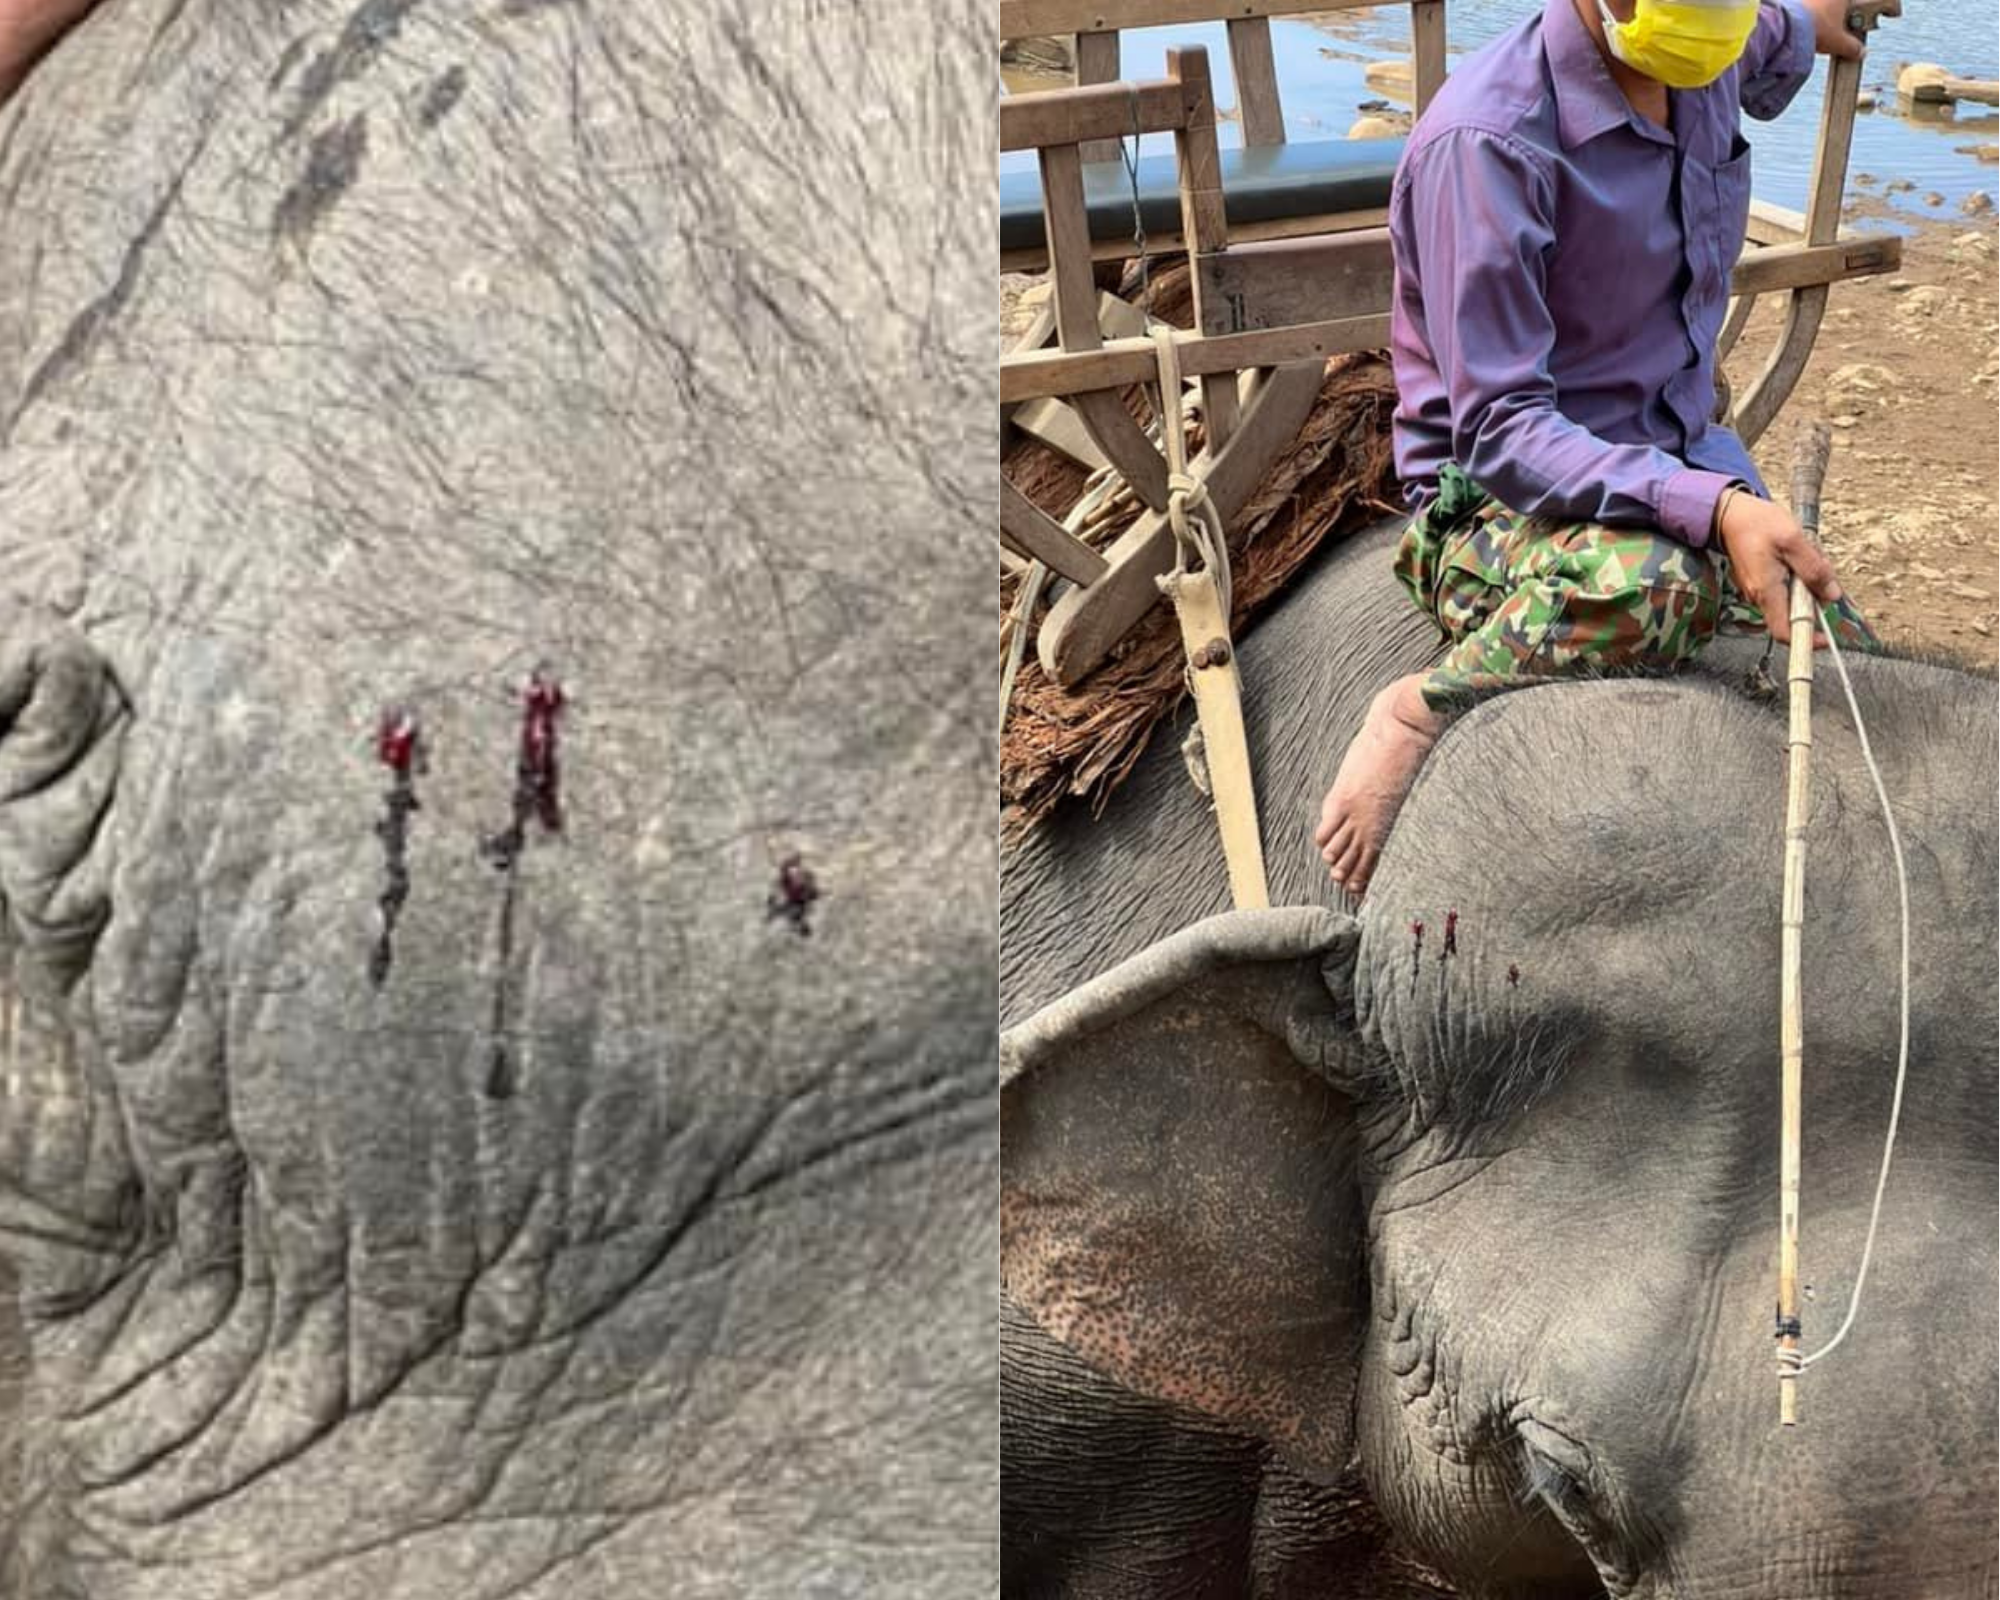 Photos of elephants at tourism sites in Dak Lak Province posted on Facebook by Nguyen Ngoc A. on February 4, 2022